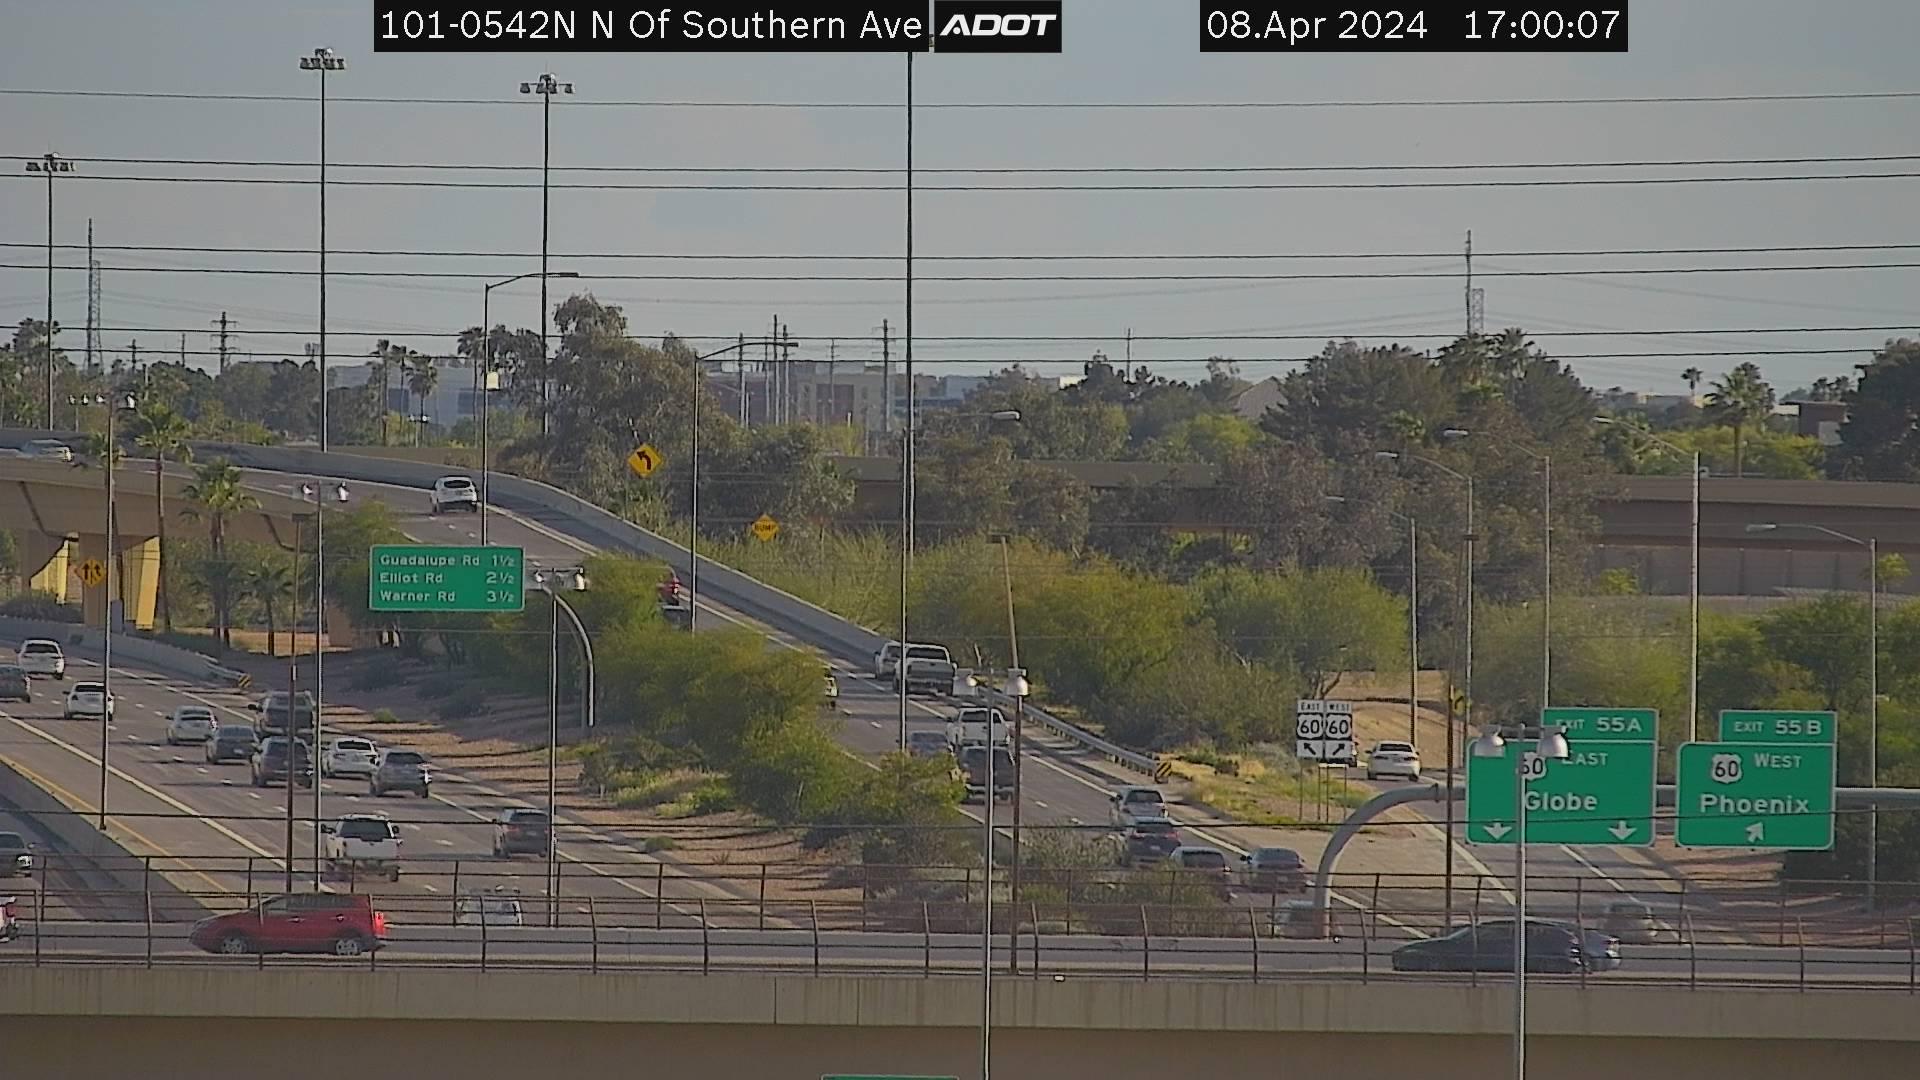 Traffic Cam Tempe › North: I-101 NB 54.20 @N of Southern Ave Player